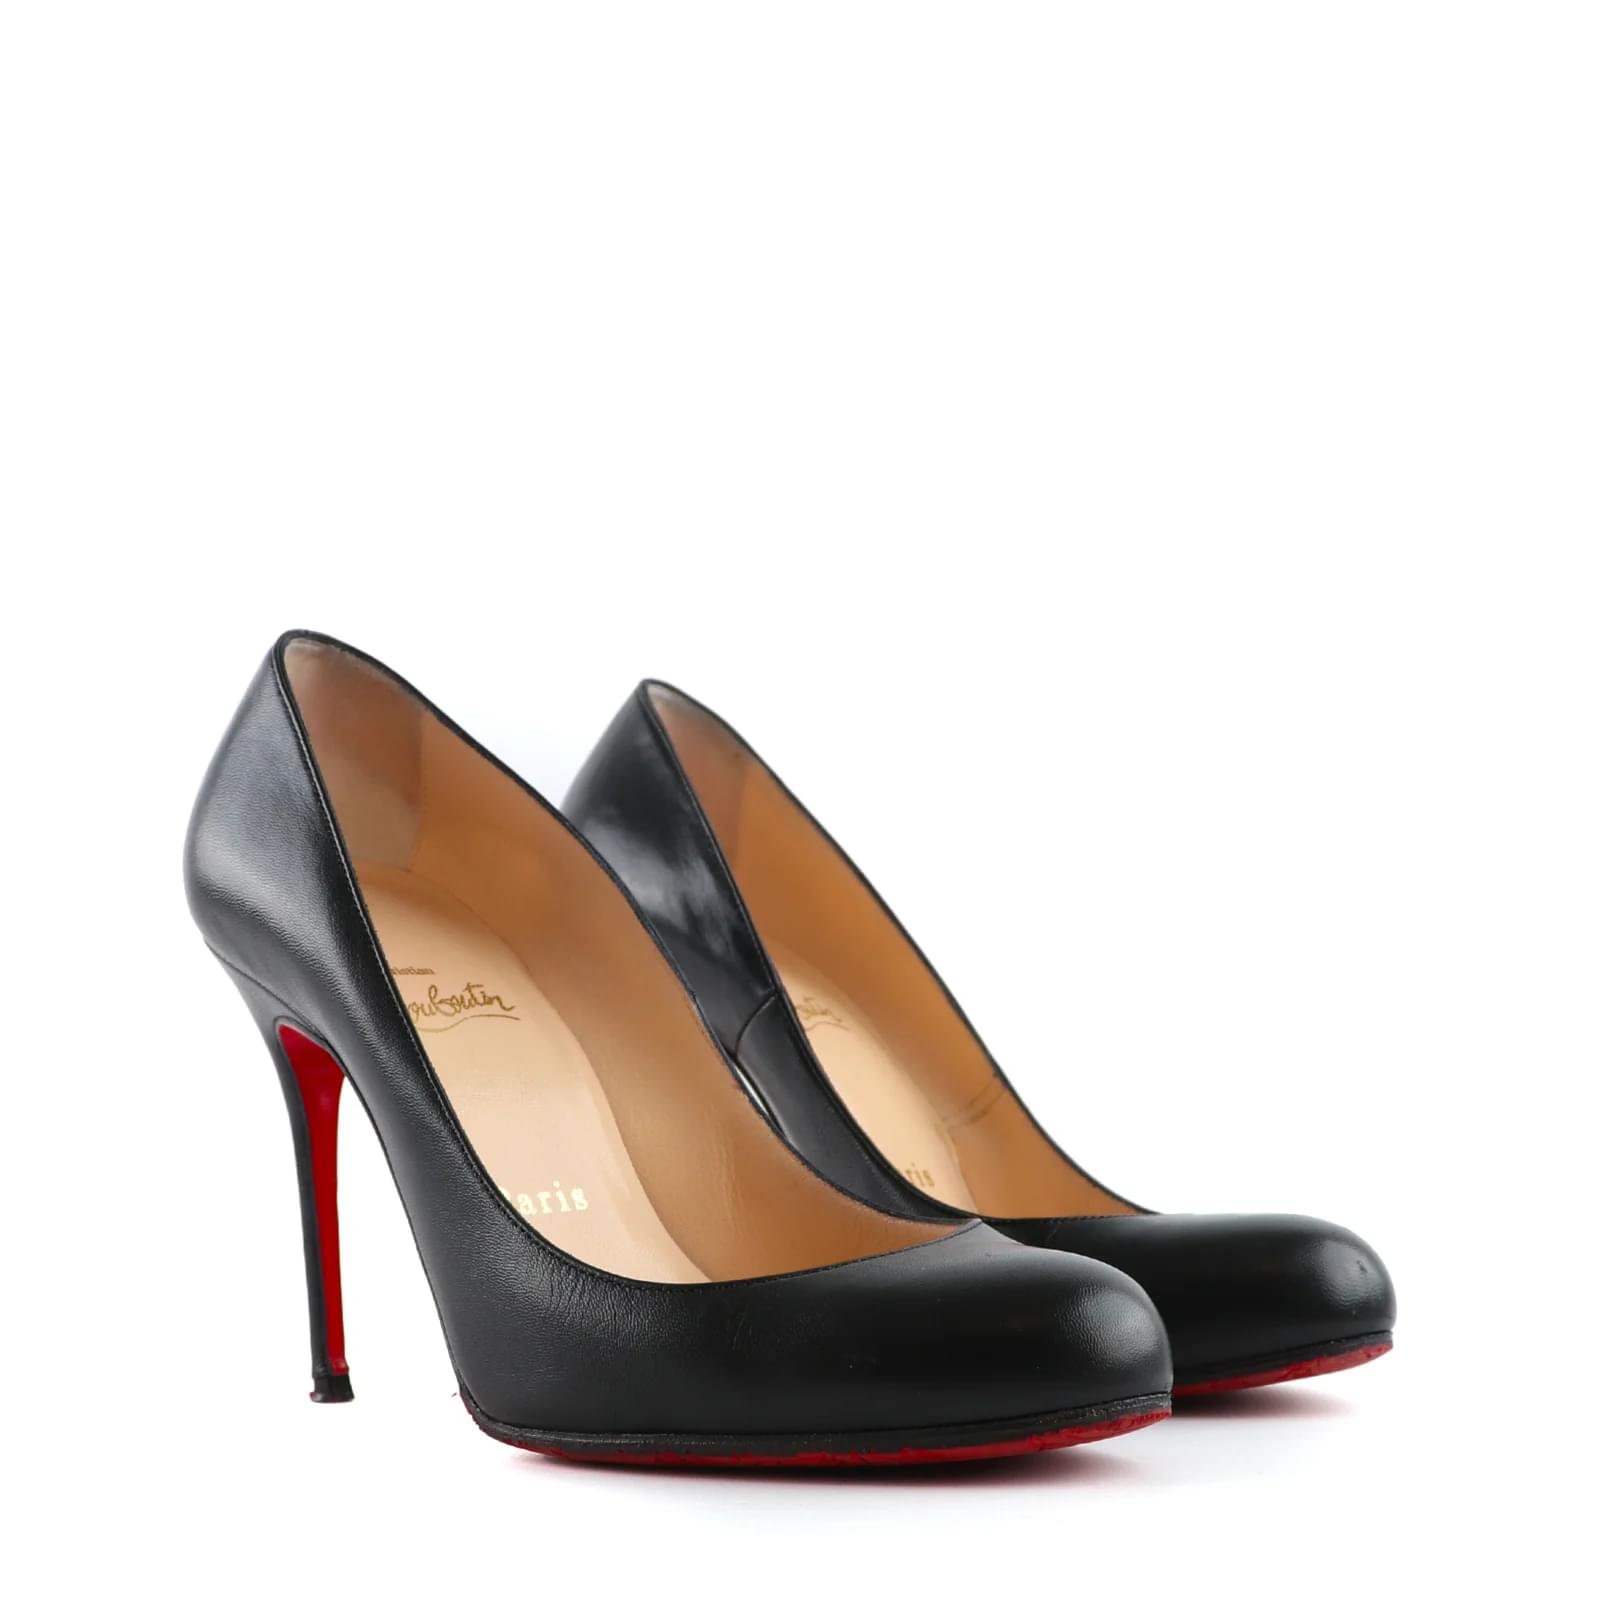 CHRISTIAN LOUBOUTIN Lace 554 85 tulle and satin pumps | NET-A-PORTER